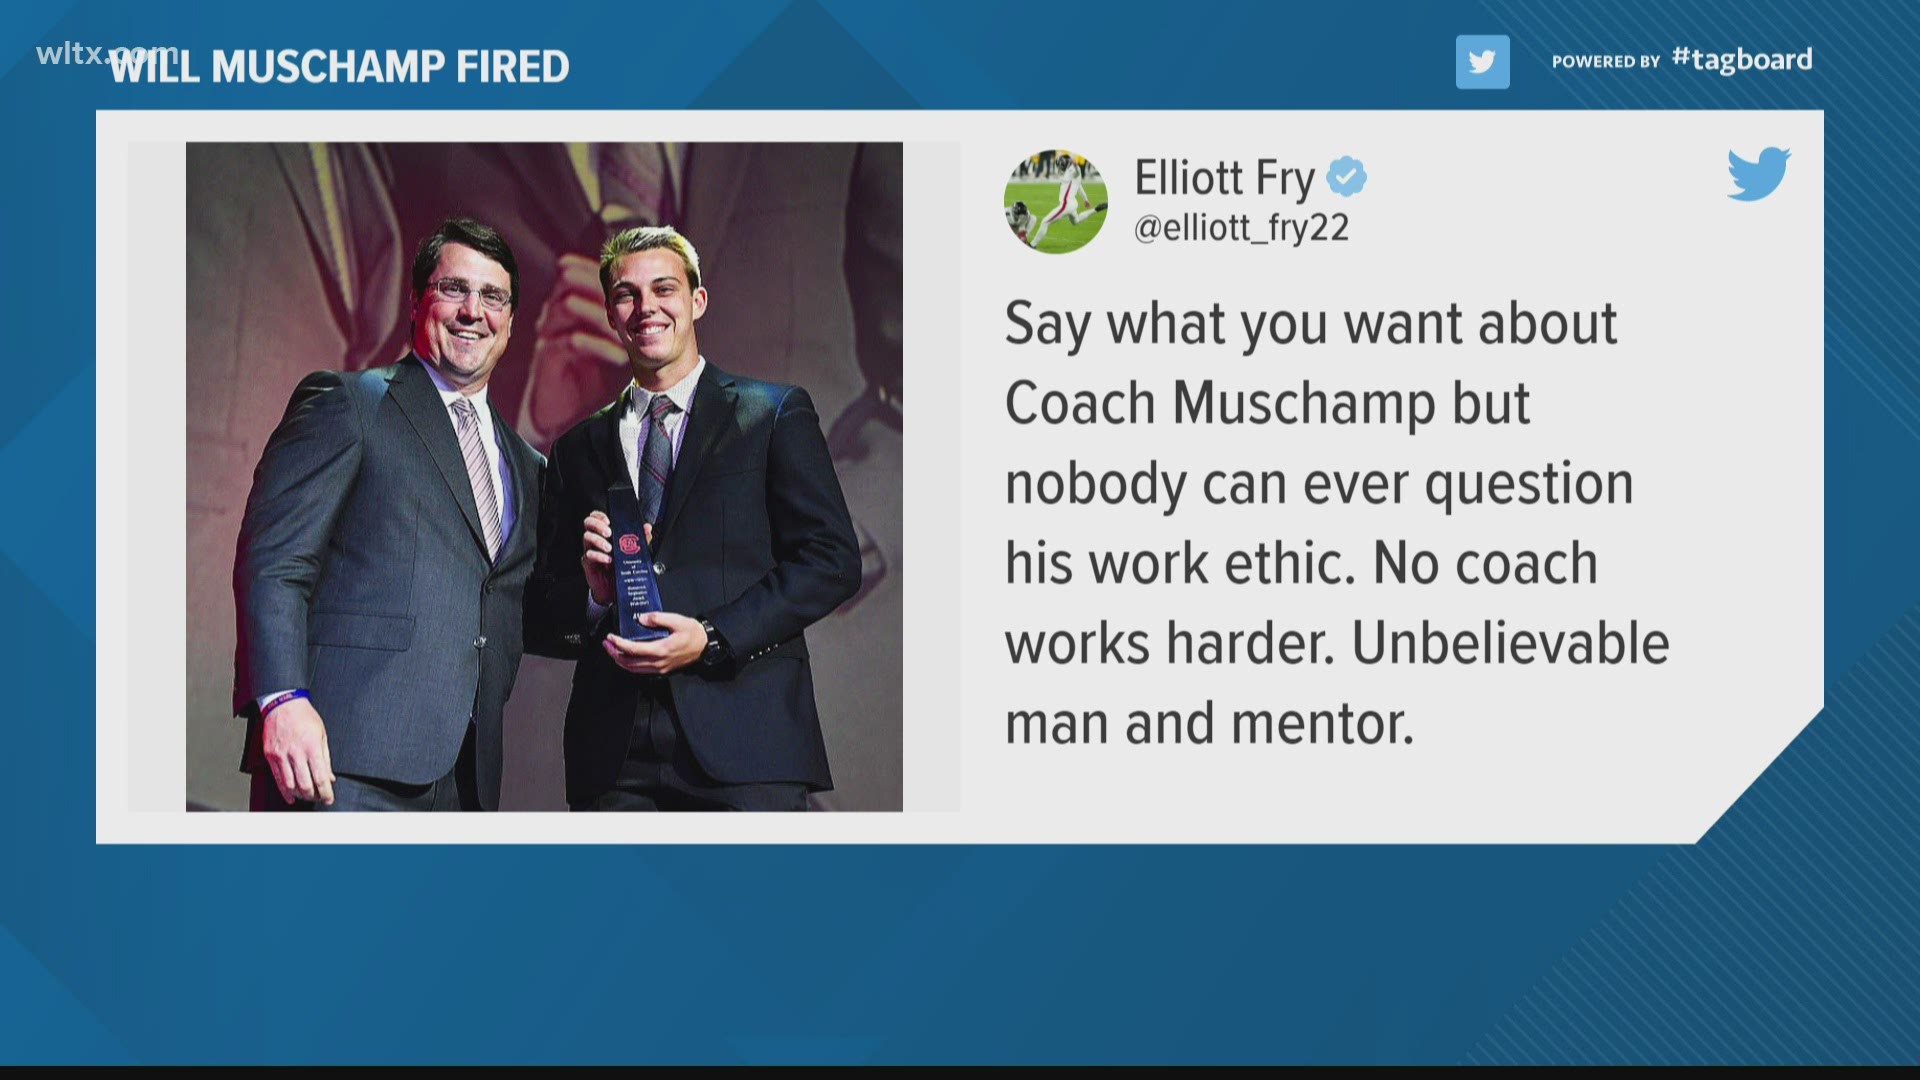 Many on social media had something to say about USC coach Muschamp's departure from the Gamecocks.